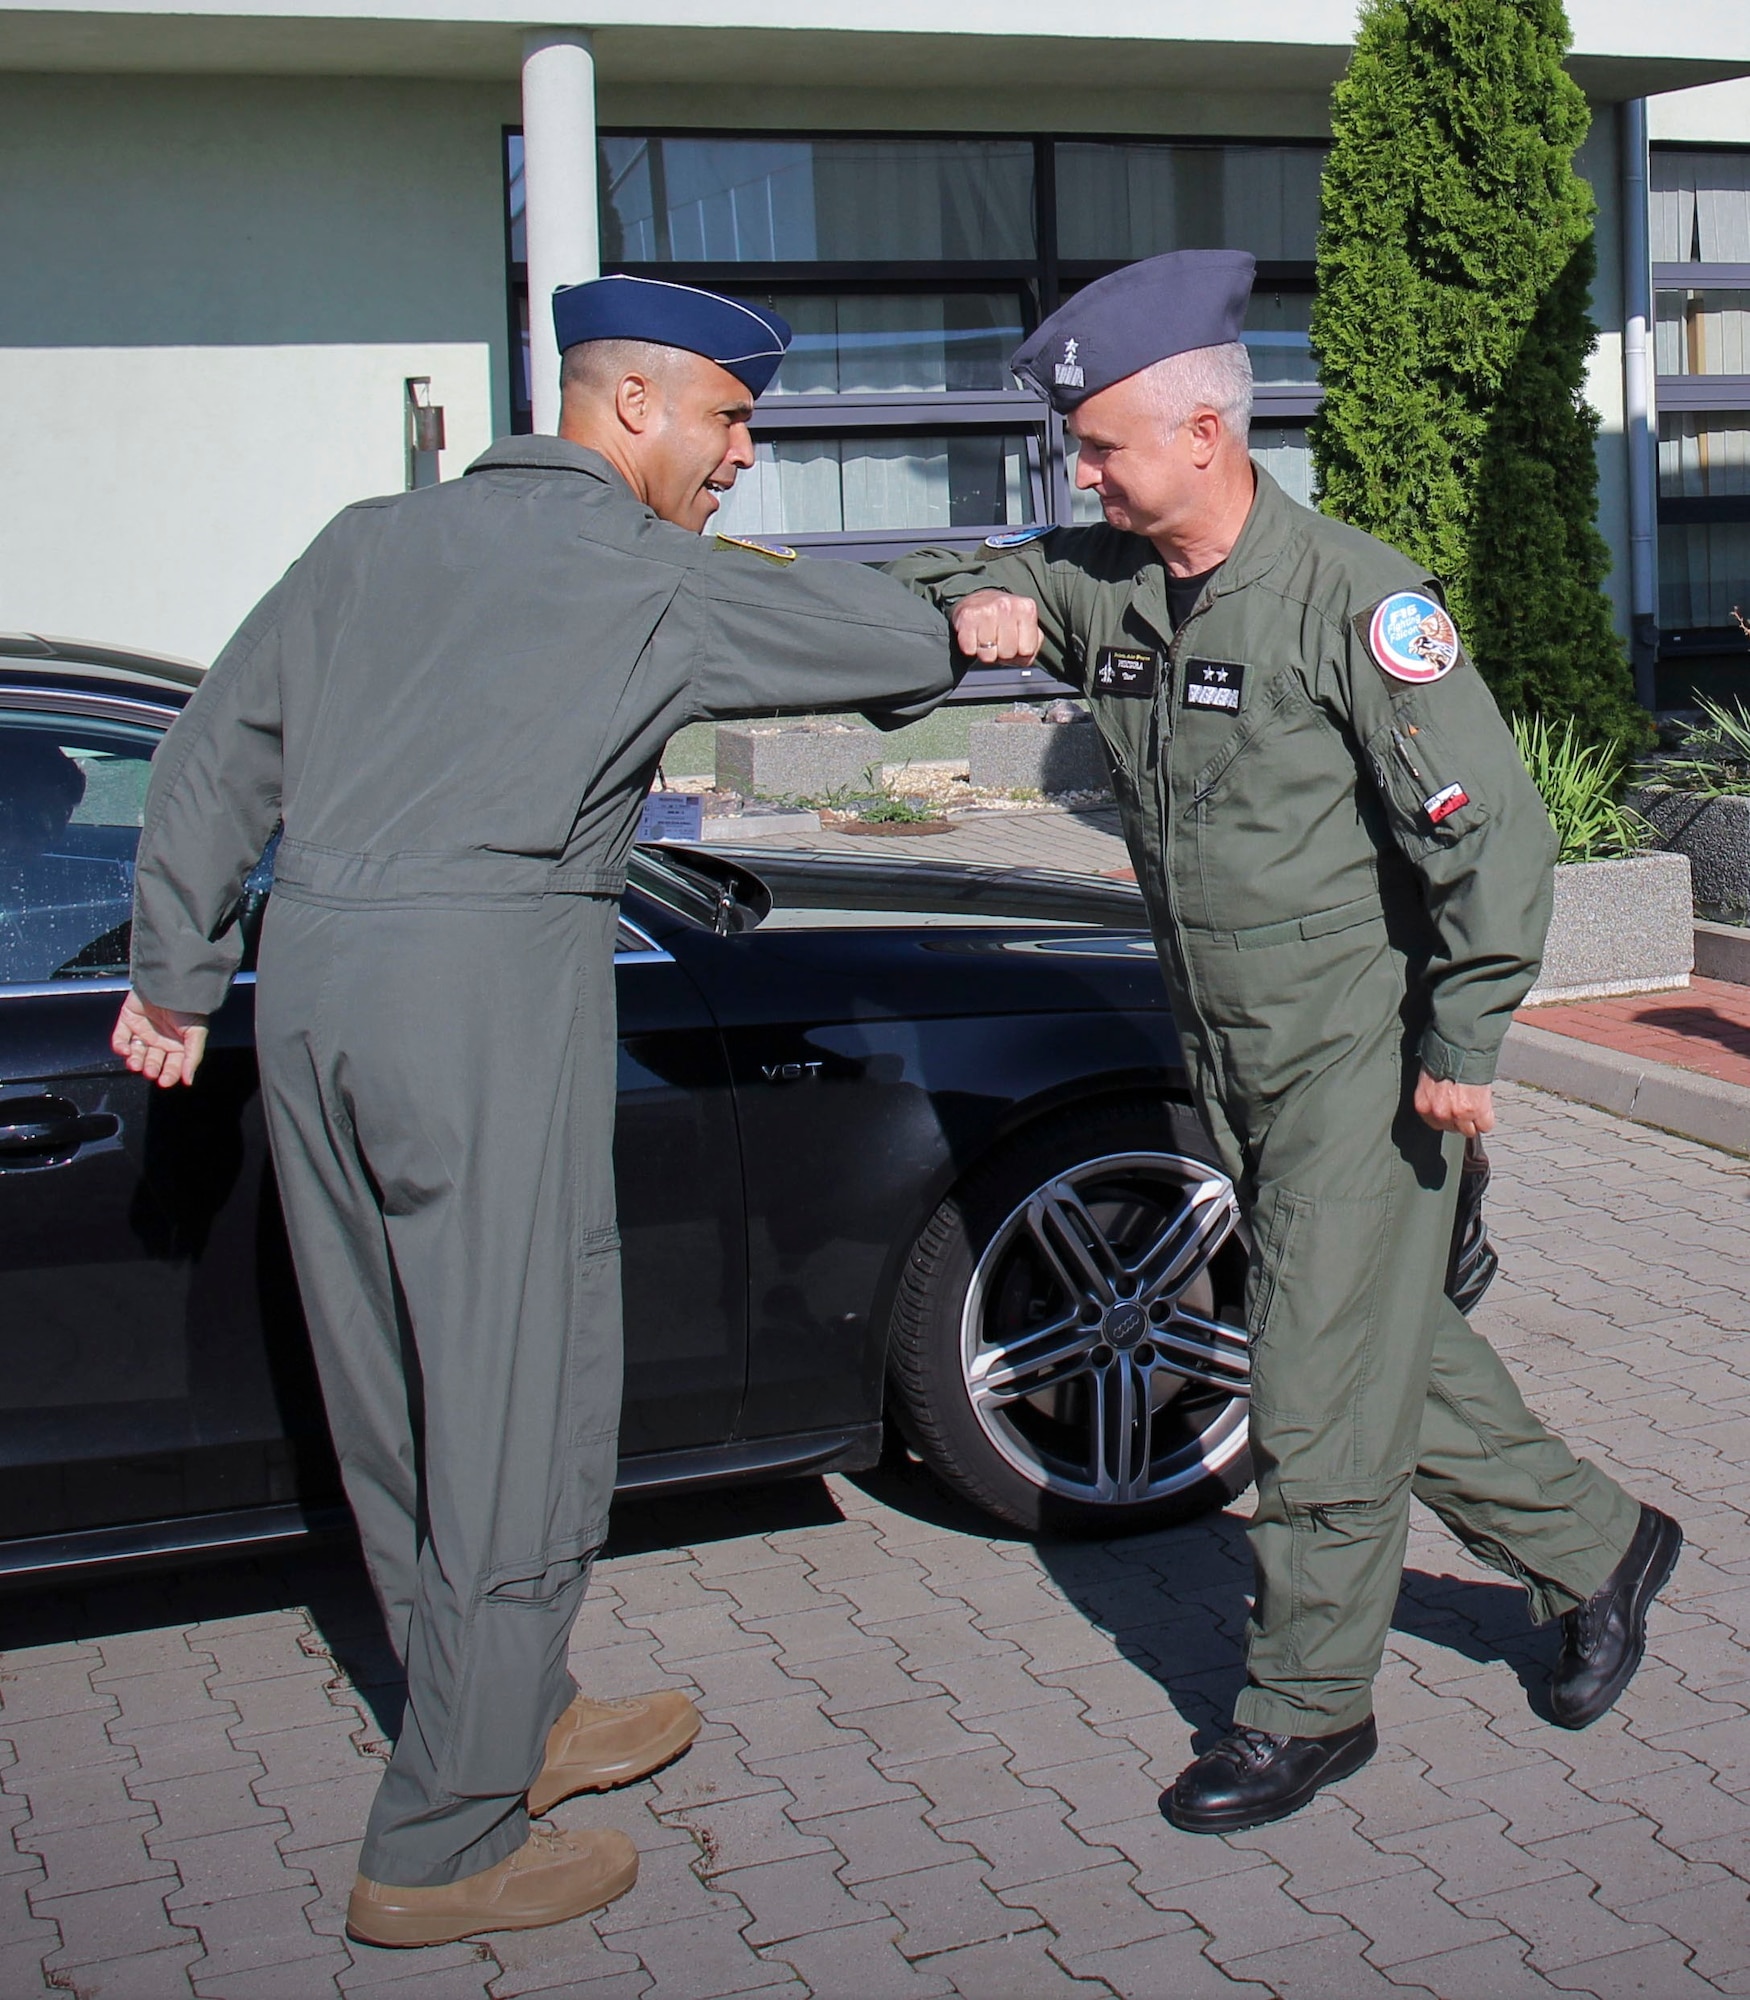 U.S. Air Force Brig. Gen. Adrian Spain, United States Air Forces in Europe and Air Forces Africa director of plans, programs and analyses, left, and  Polish air force Maj. Gen. Jacek Pszczoła, inspector of the Polish air force, bump elbows in place of handshakes during a tour of the 32nd Tactical Air Base, August 24, 2020, at Łask AB, Poland. The U.S. values the bilateral relationship with Poland and continues to share perspectives, train on missions and learn from each other. (Photo courtesy of the 32nd Tactical Air Base)